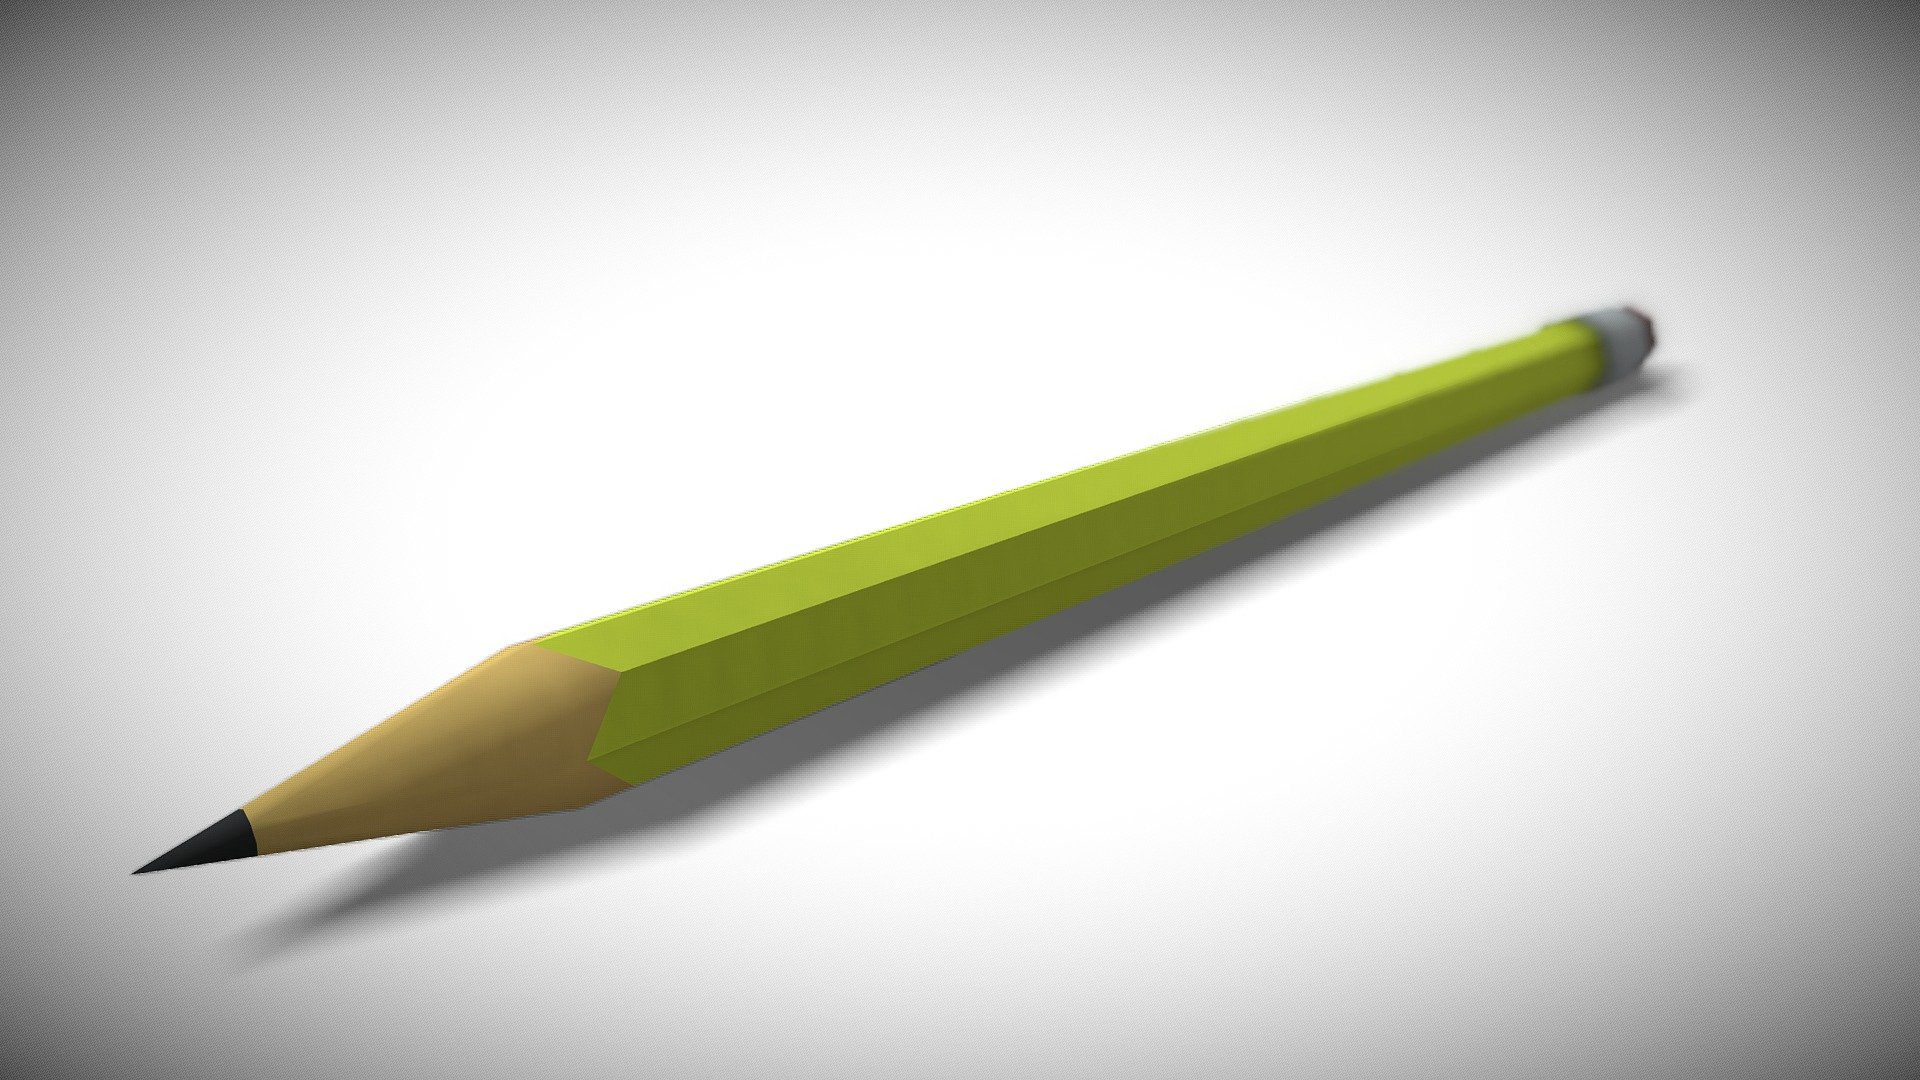 Pencil shapr and ready to write stuff on paper - Pencil - Buy Royalty Free 3D model by Angel V Mendez (@Angel.V.Mendez) 3d model